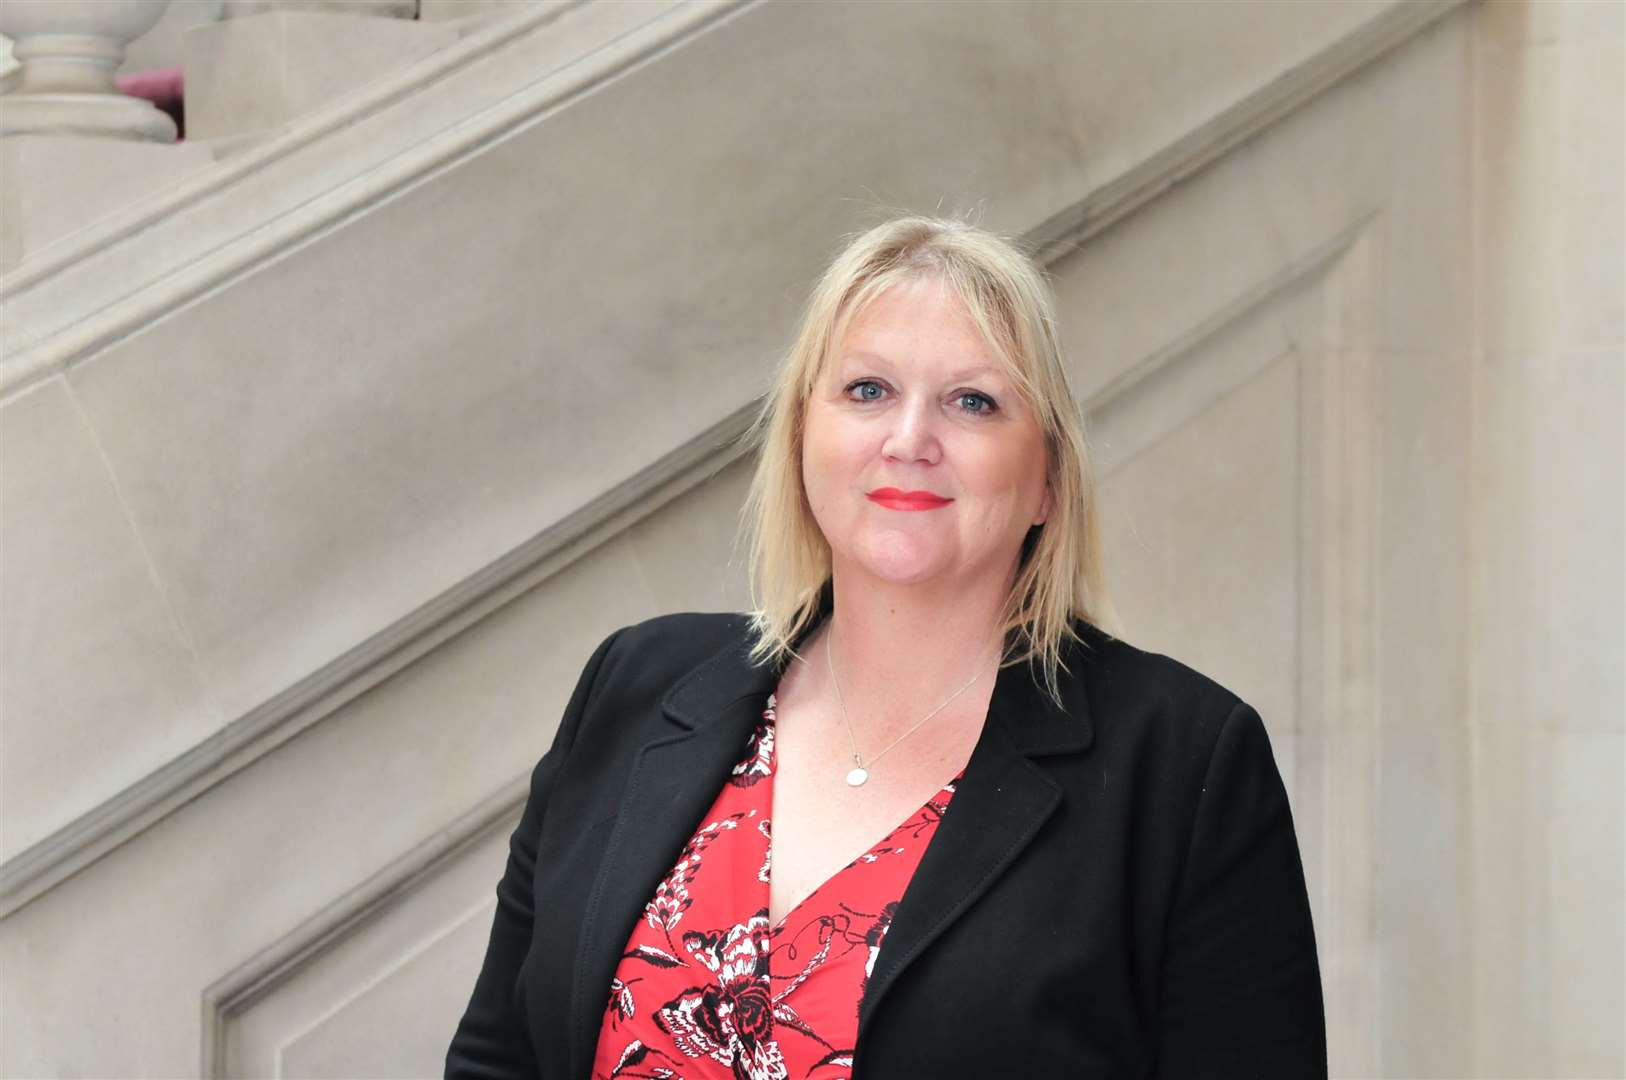 Karen Constantine wrote an open letter to the South Thanet MP